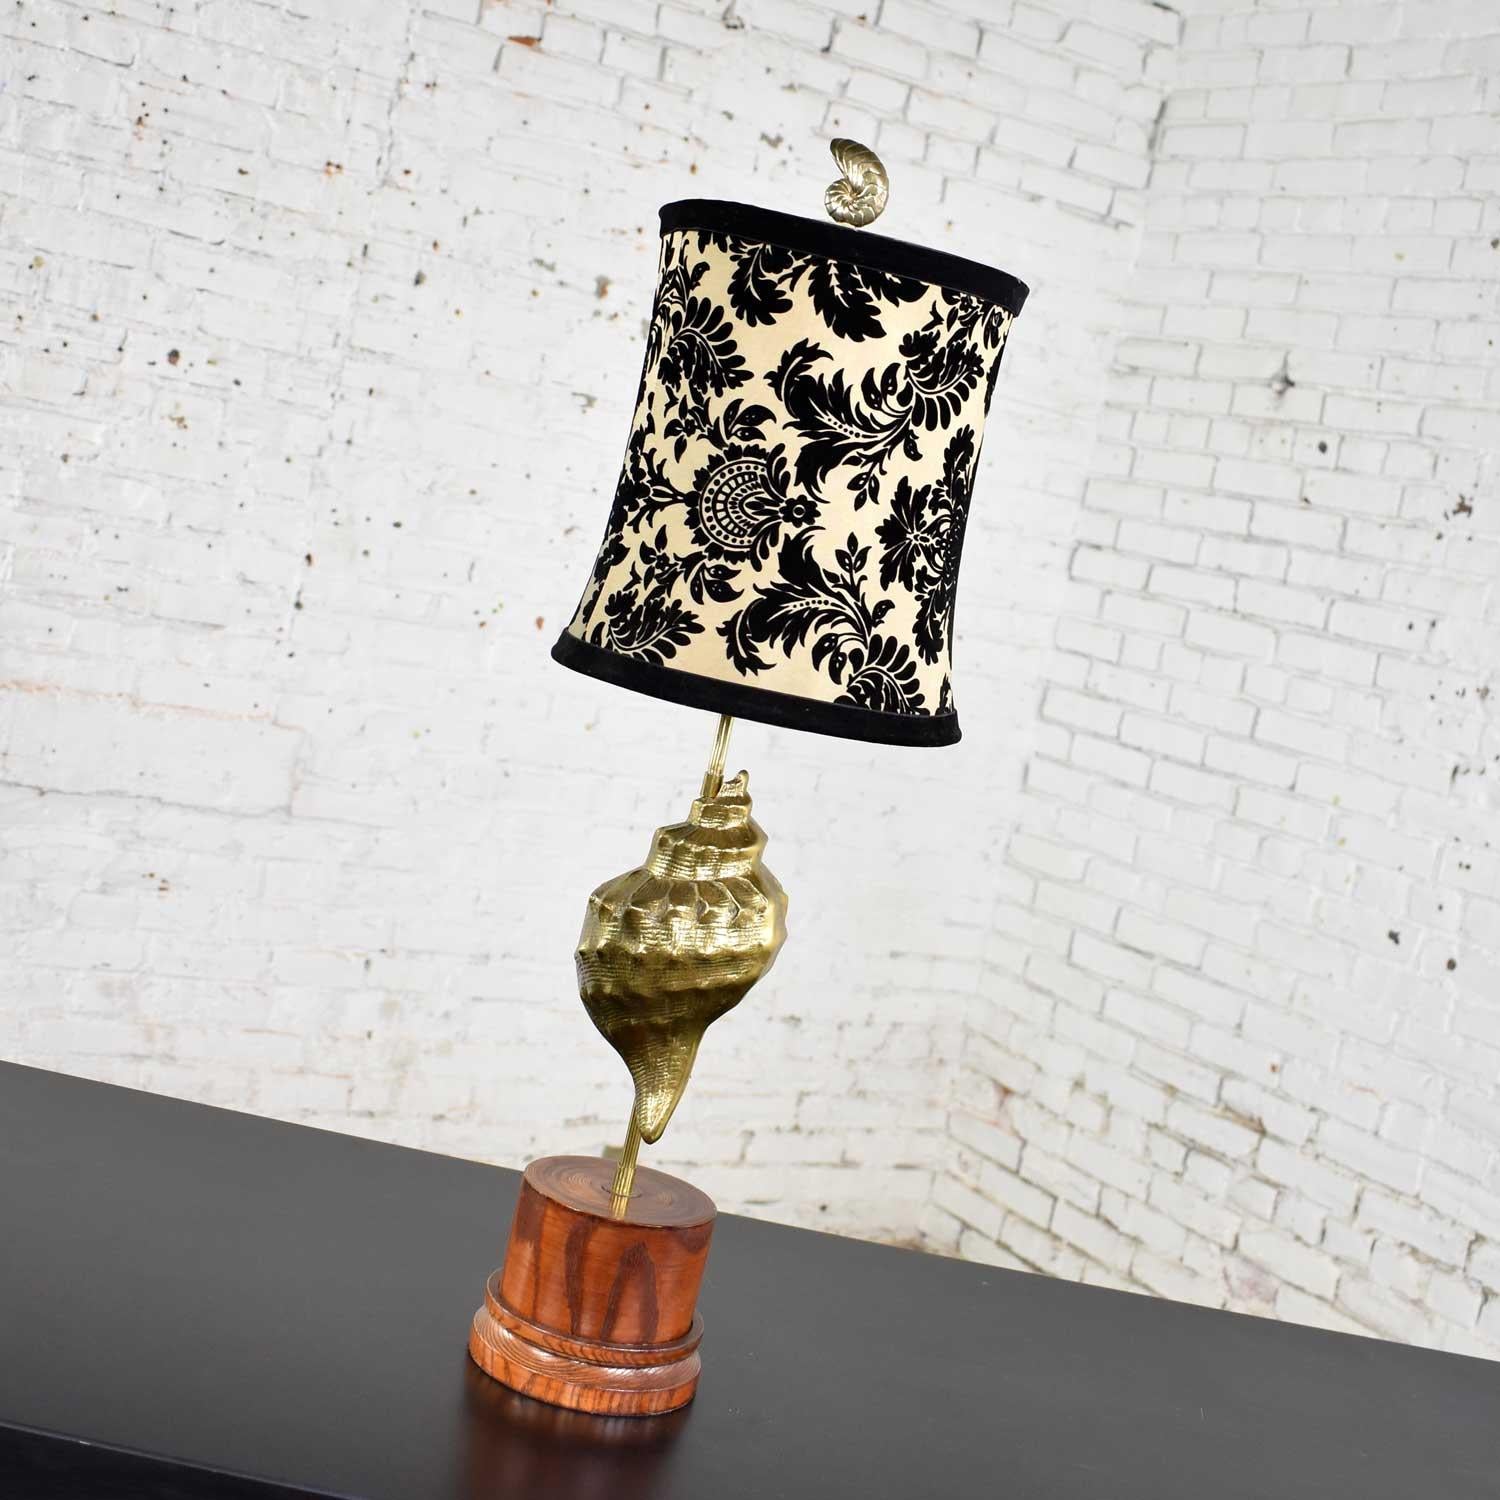 Awesome vintage cast brass conch shell table lamp on a turned wood base. It is adorned with a relatively new black velvet and taffeta lamp shade. It is in wonderful vintage condition with age appropriate wear to both lamp and shade. Please see